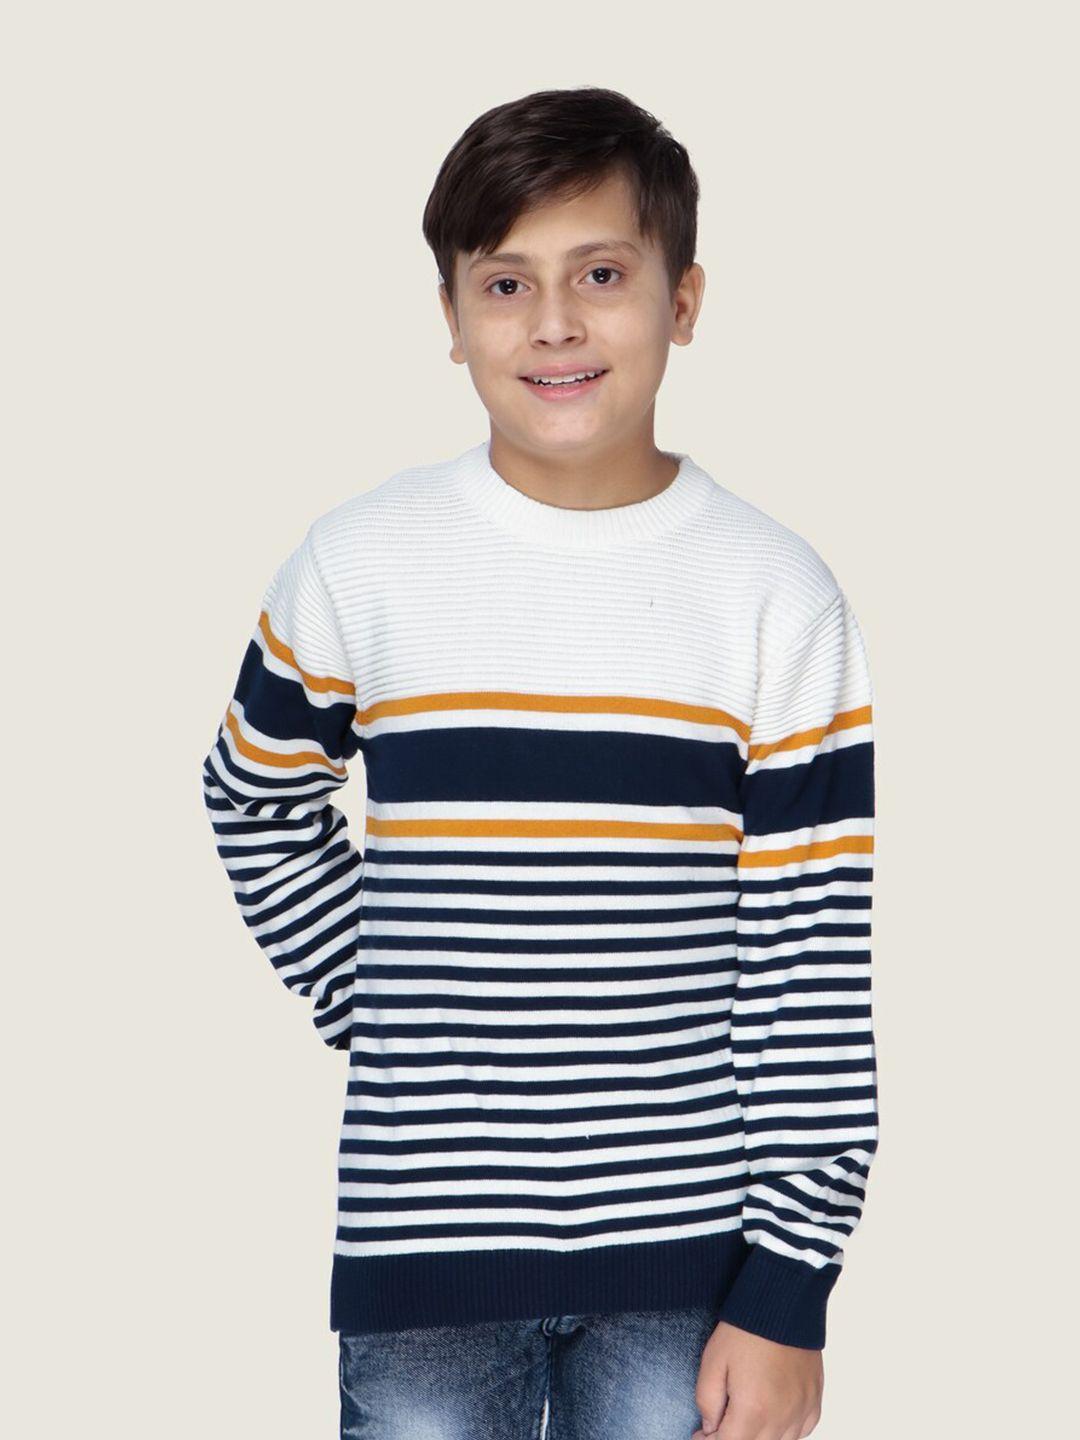 lasnak boys white & navy blue striped cotton pullover sweater